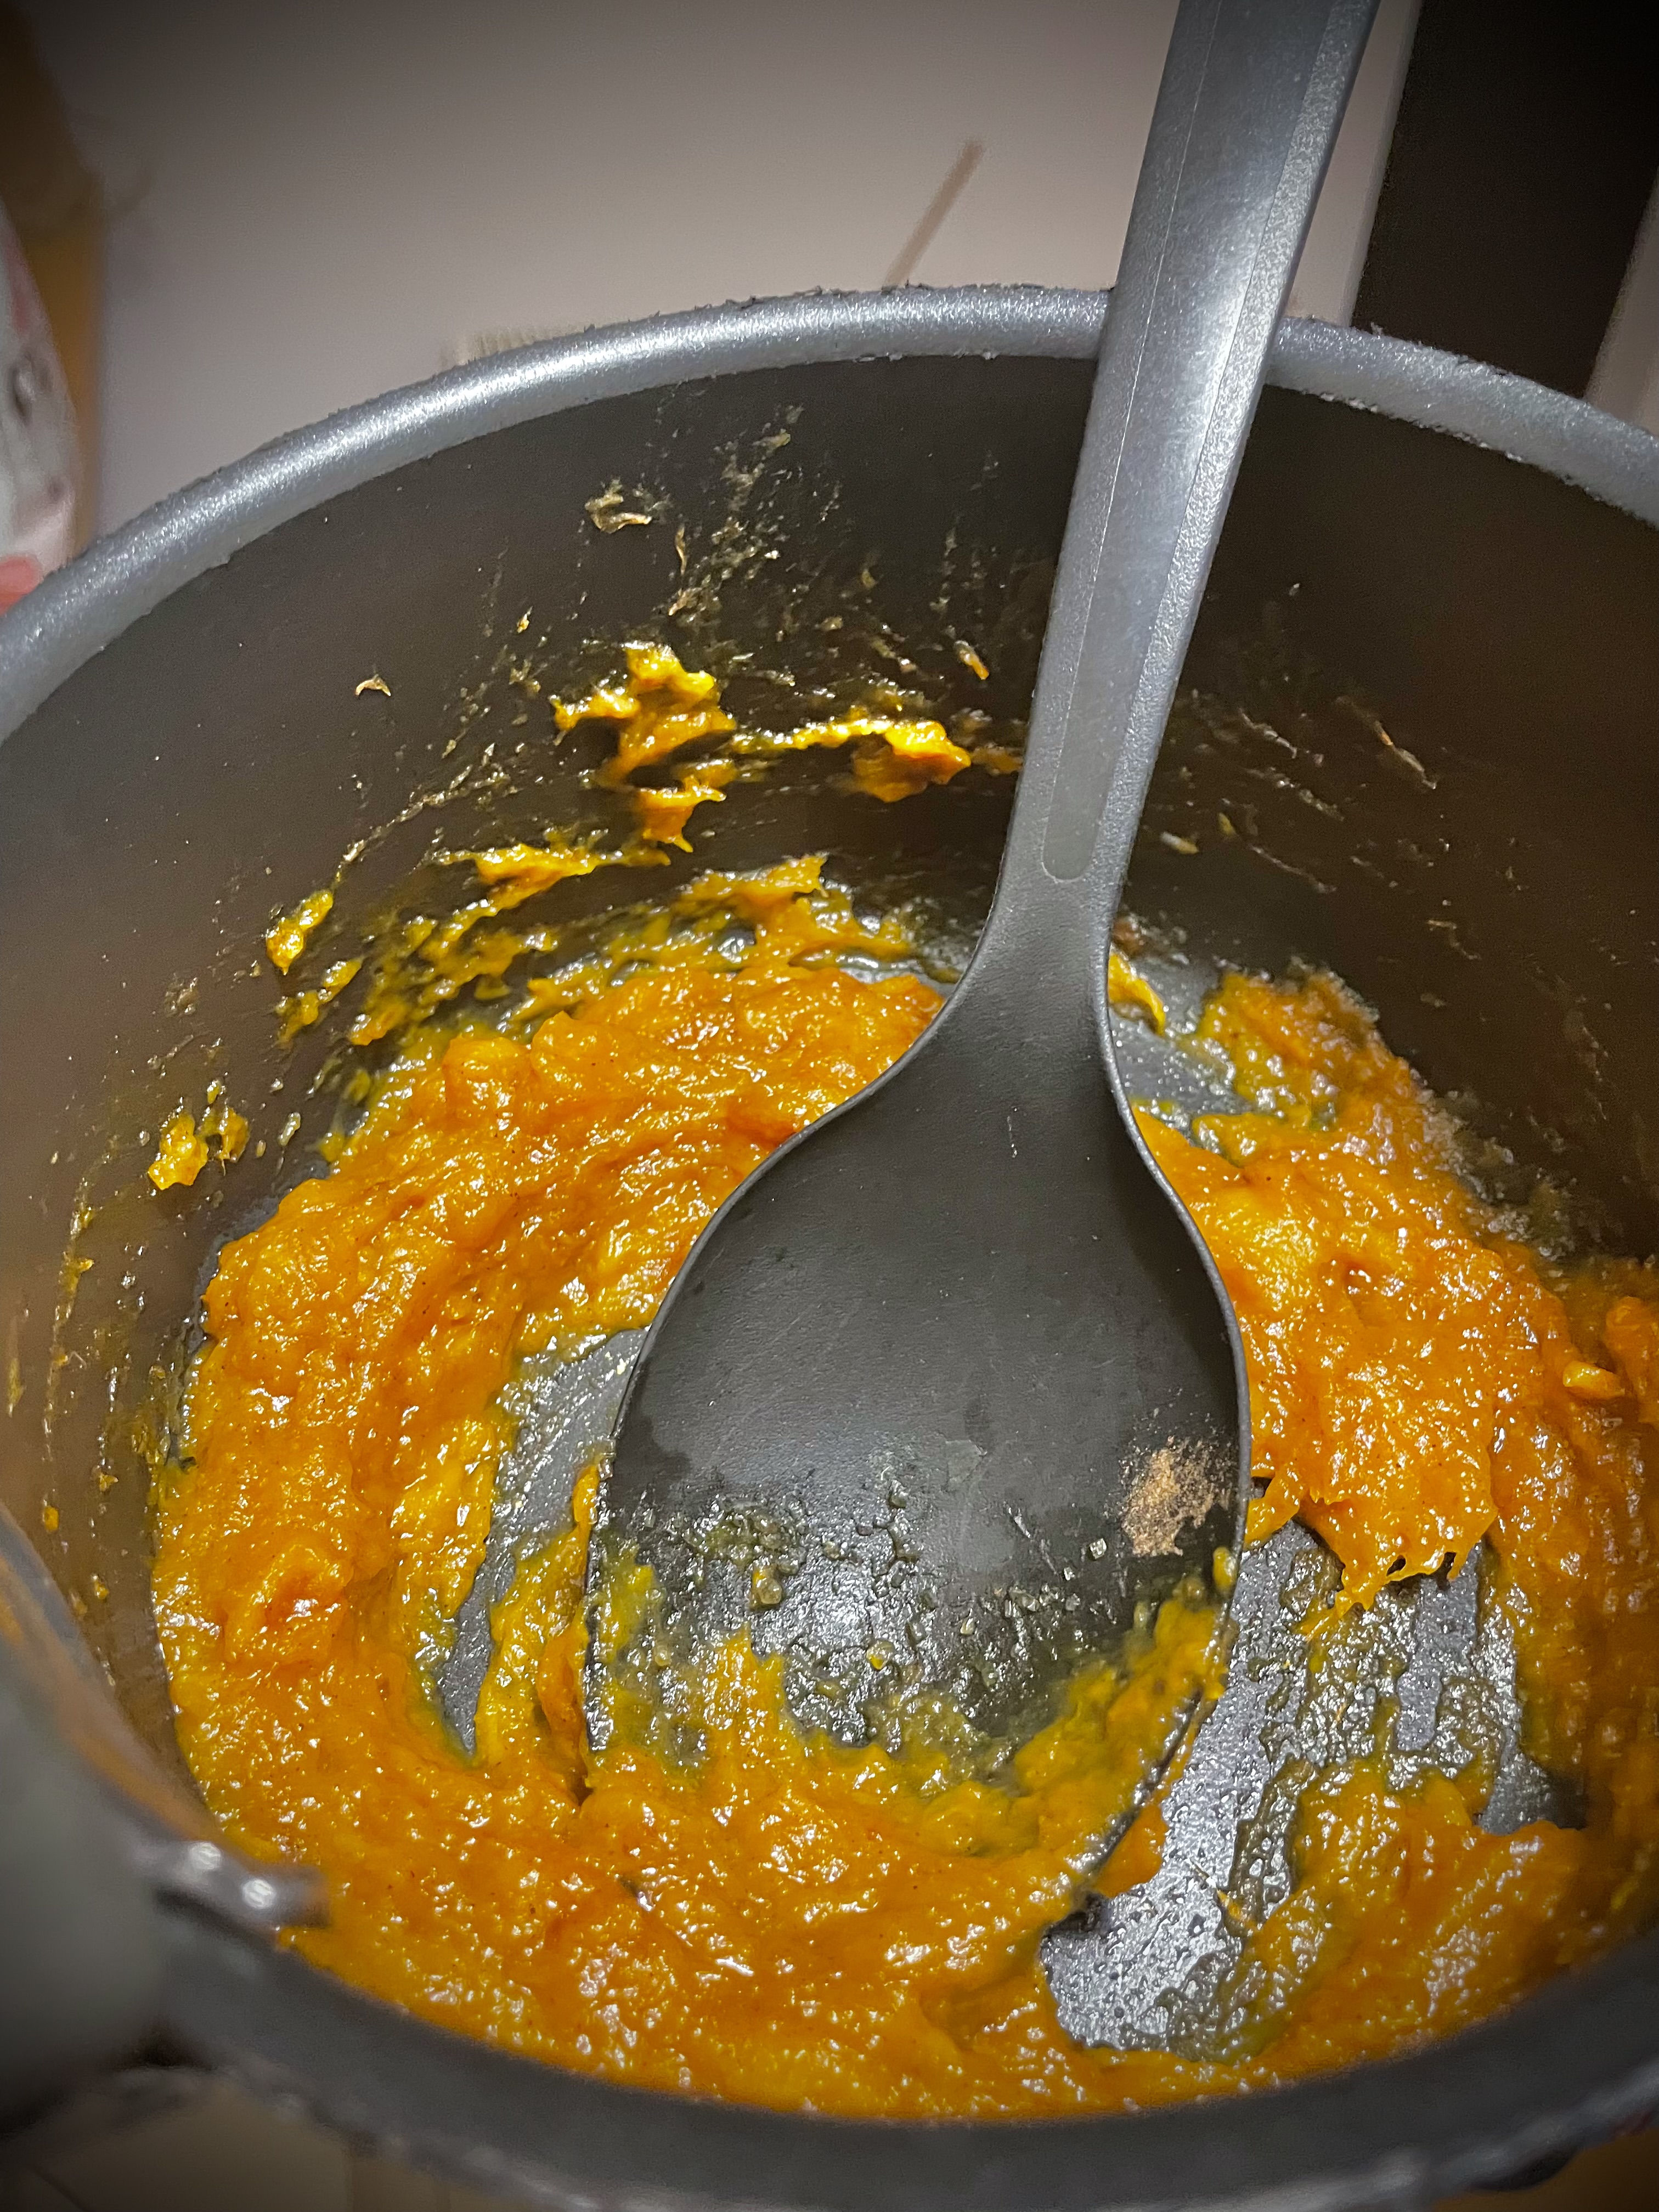 The butternut squash, butter, and brown sugar mix